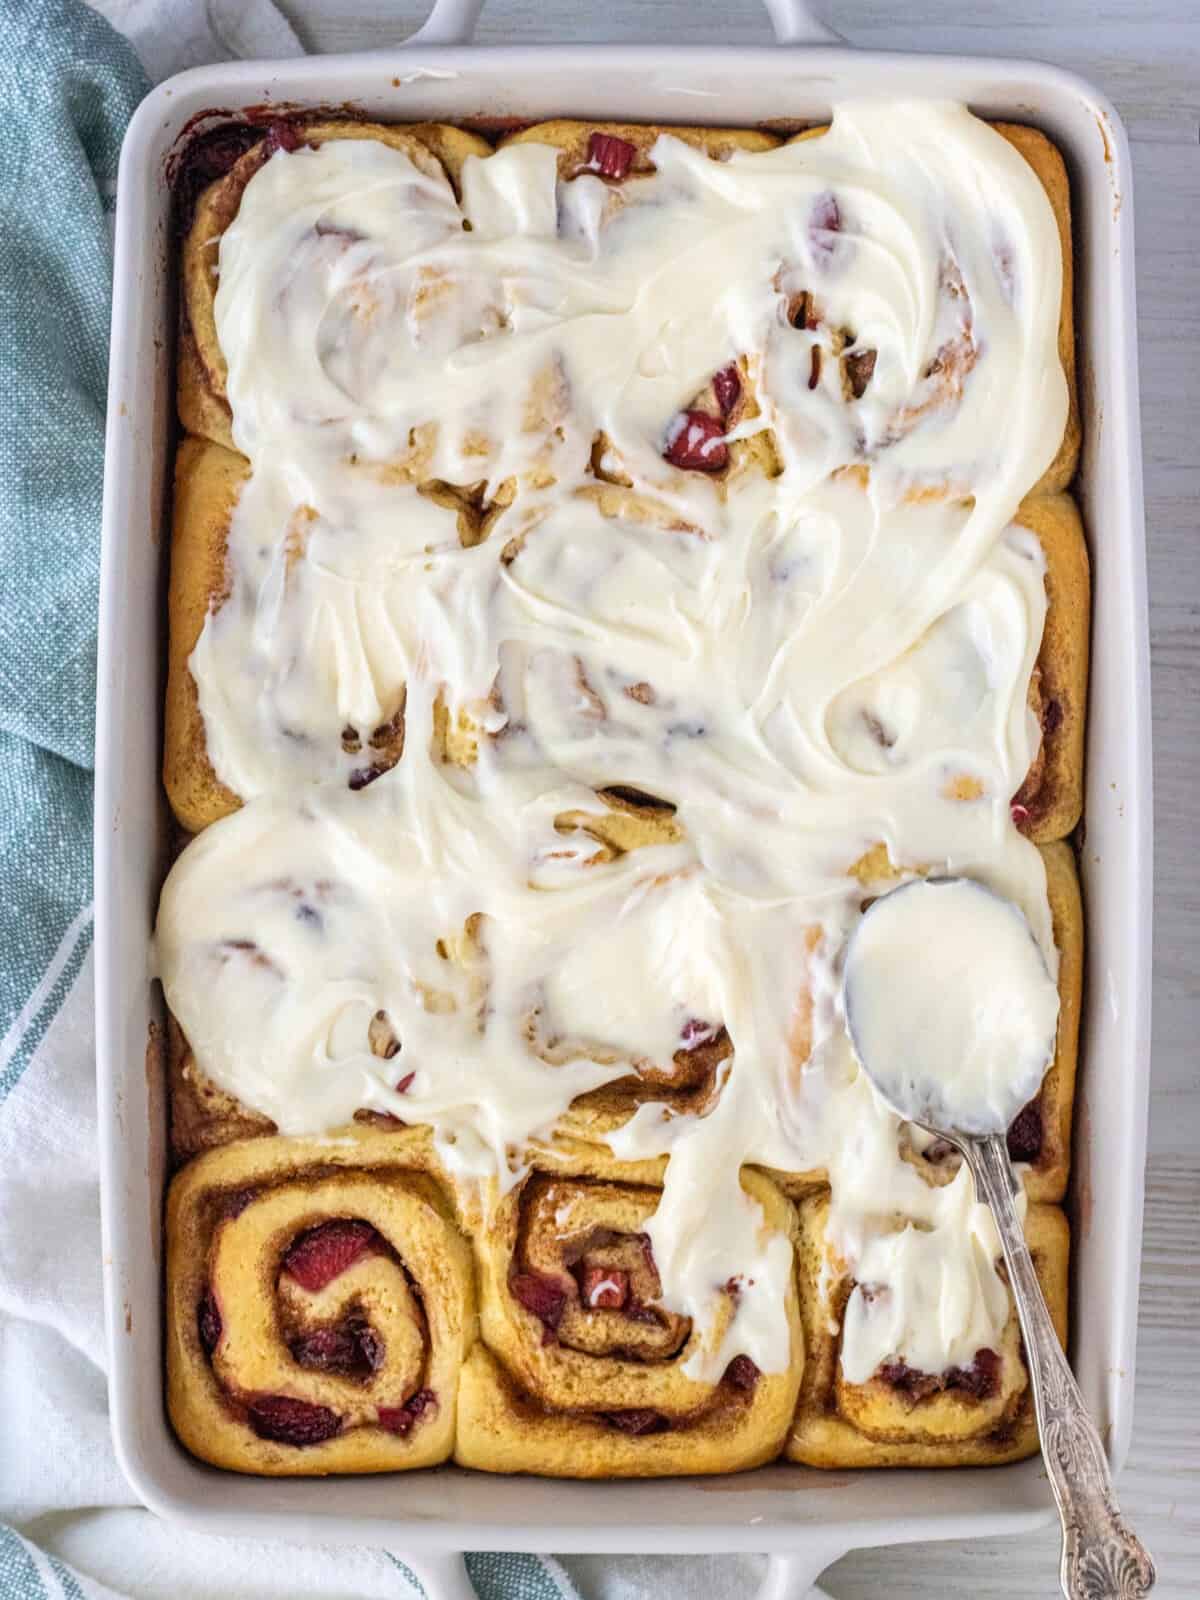 Strawberry cinnamon rolls in a 9x13 baking dish topped with frosting and a spoon.